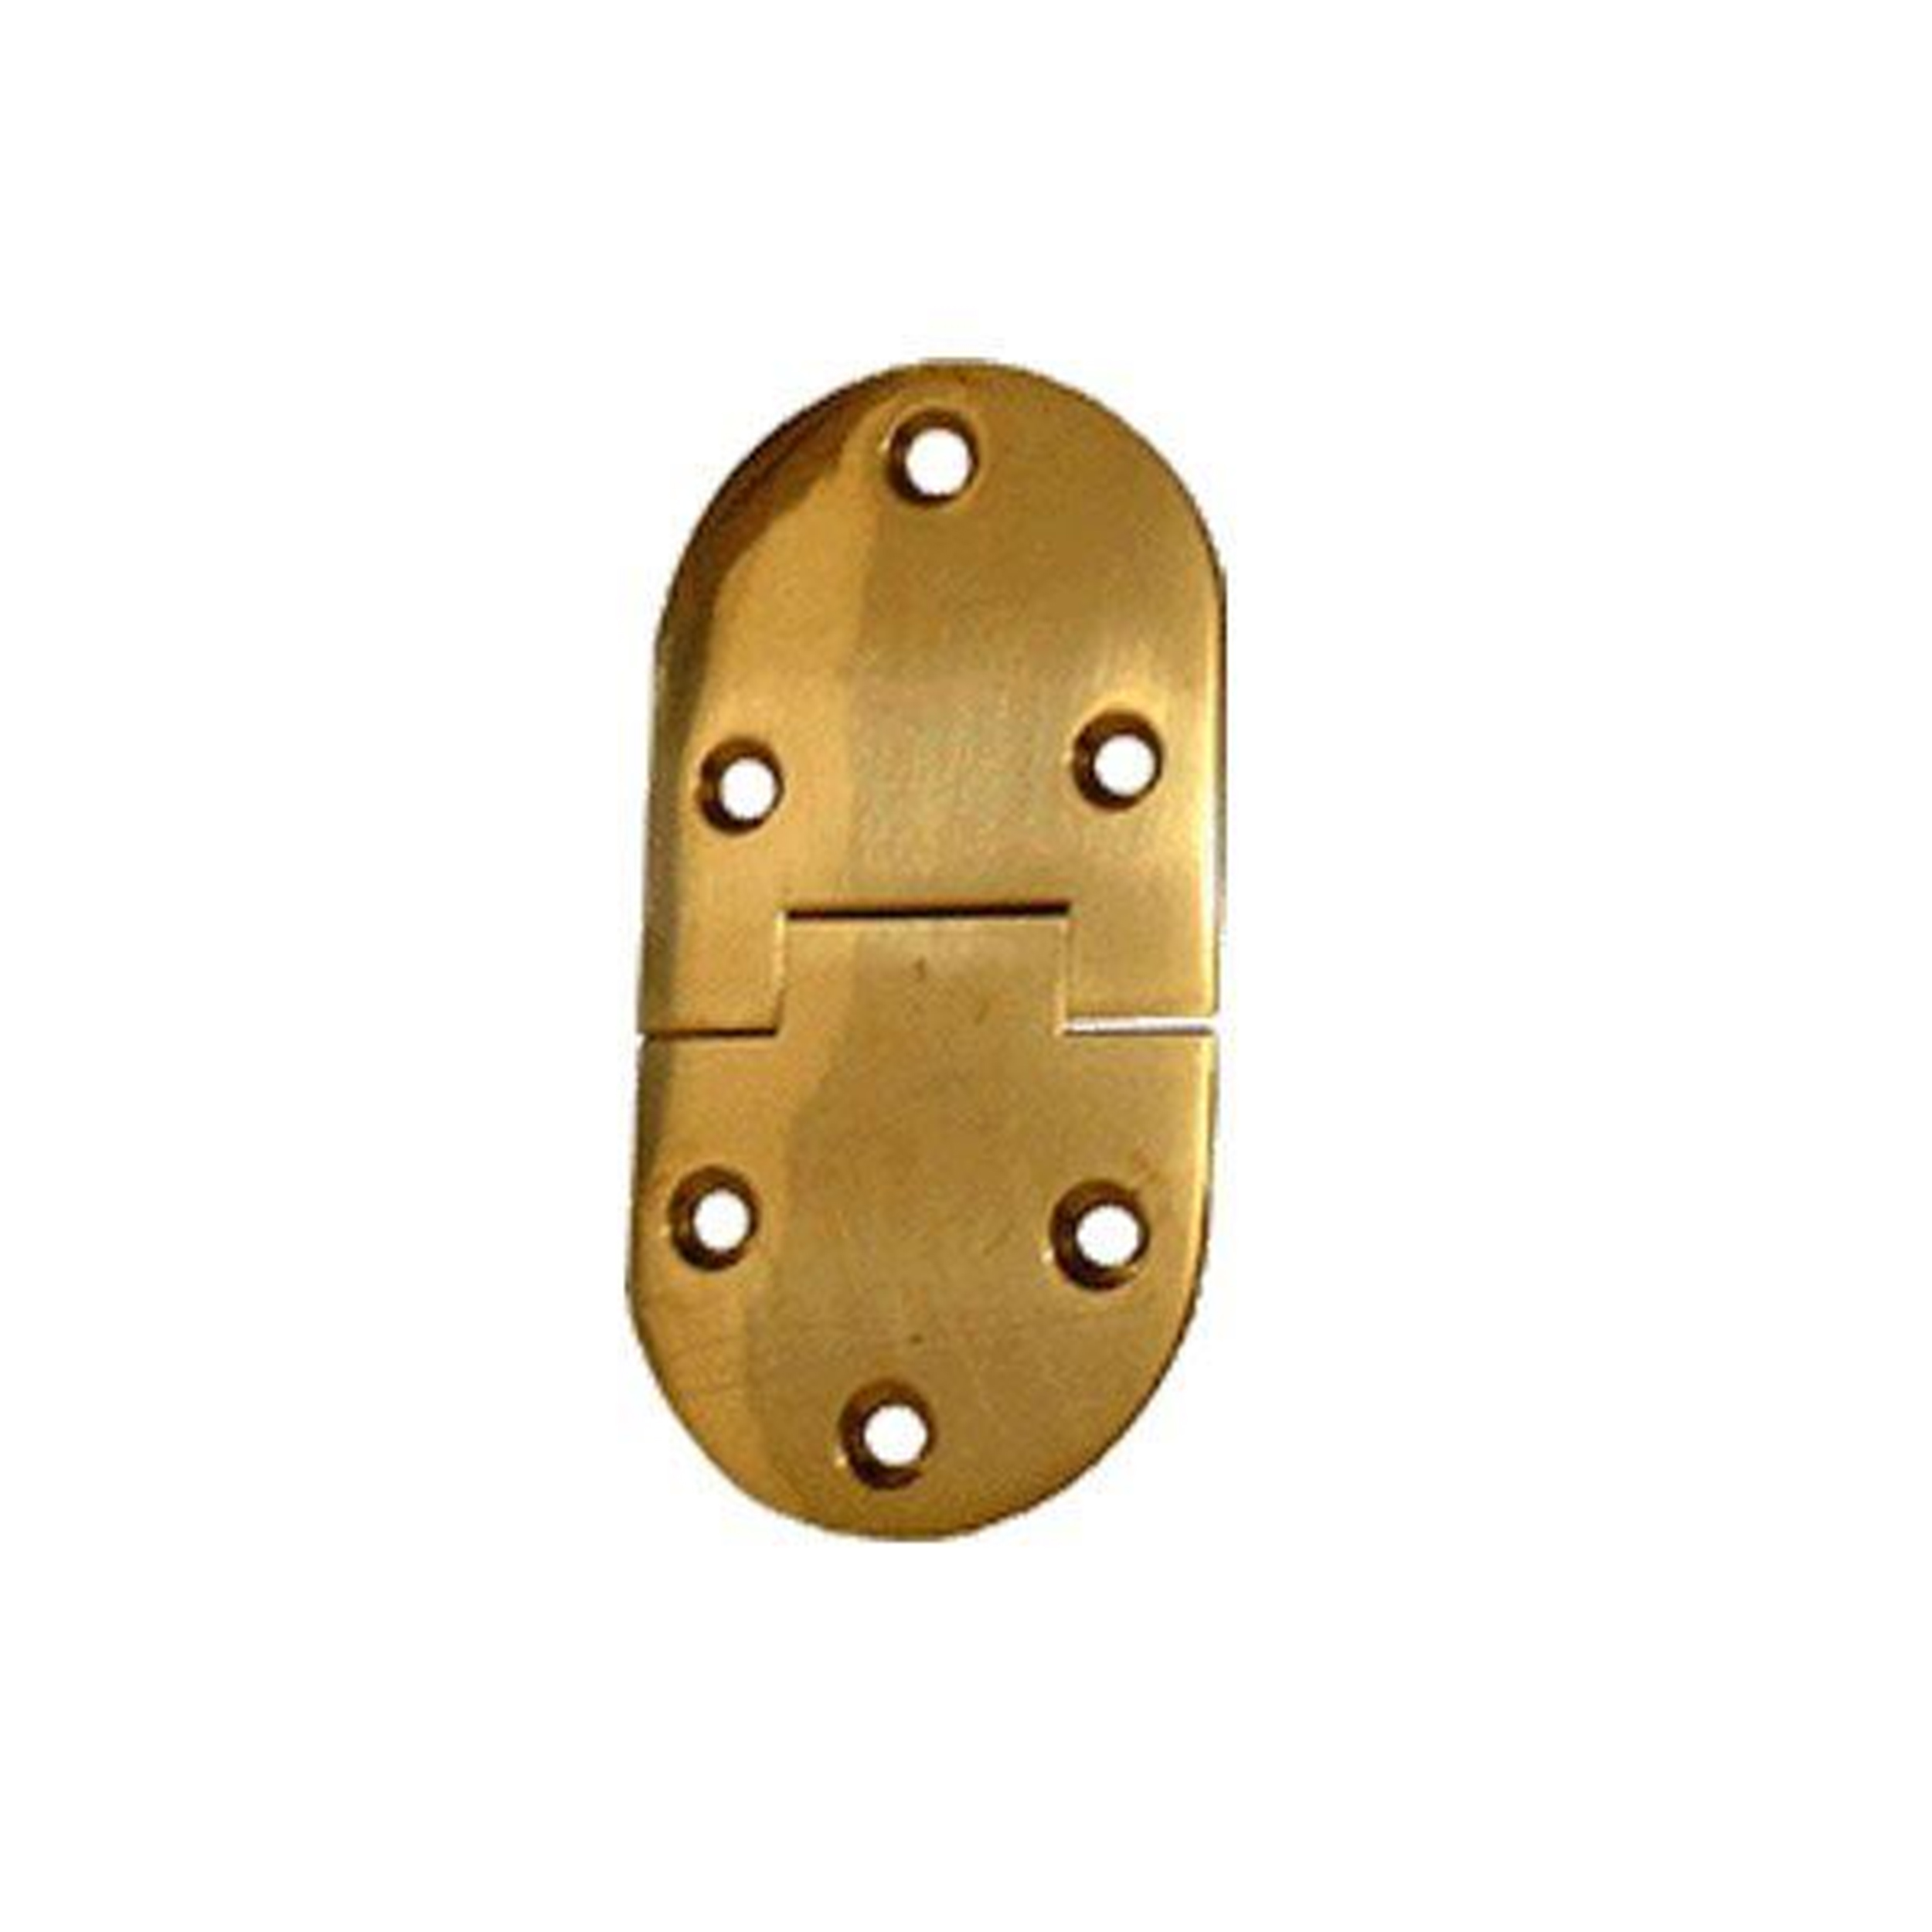 Butler Tray Hinge, Round, 3" Length X 1-1/2" Width Hinge, Each, Requires No. 6 Screws Not Included